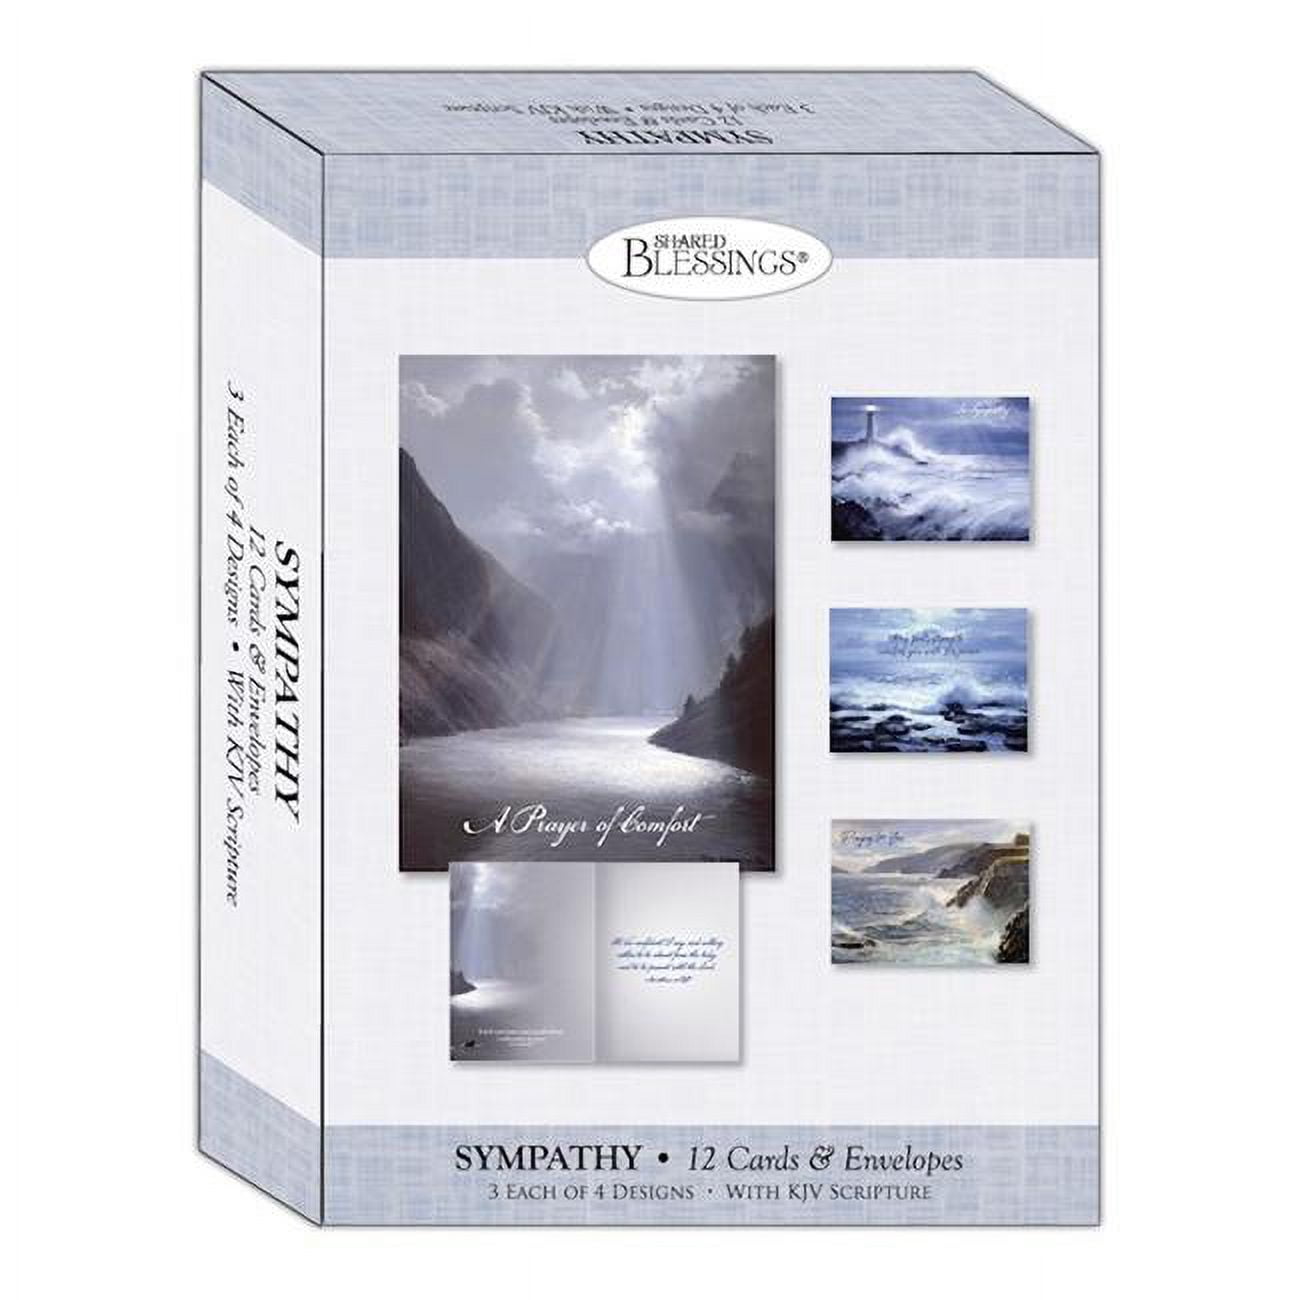 Picture of Crown Point Graphics 309288 Coastlines Sympathy Shared Blessings Boxed Card - Box of 12